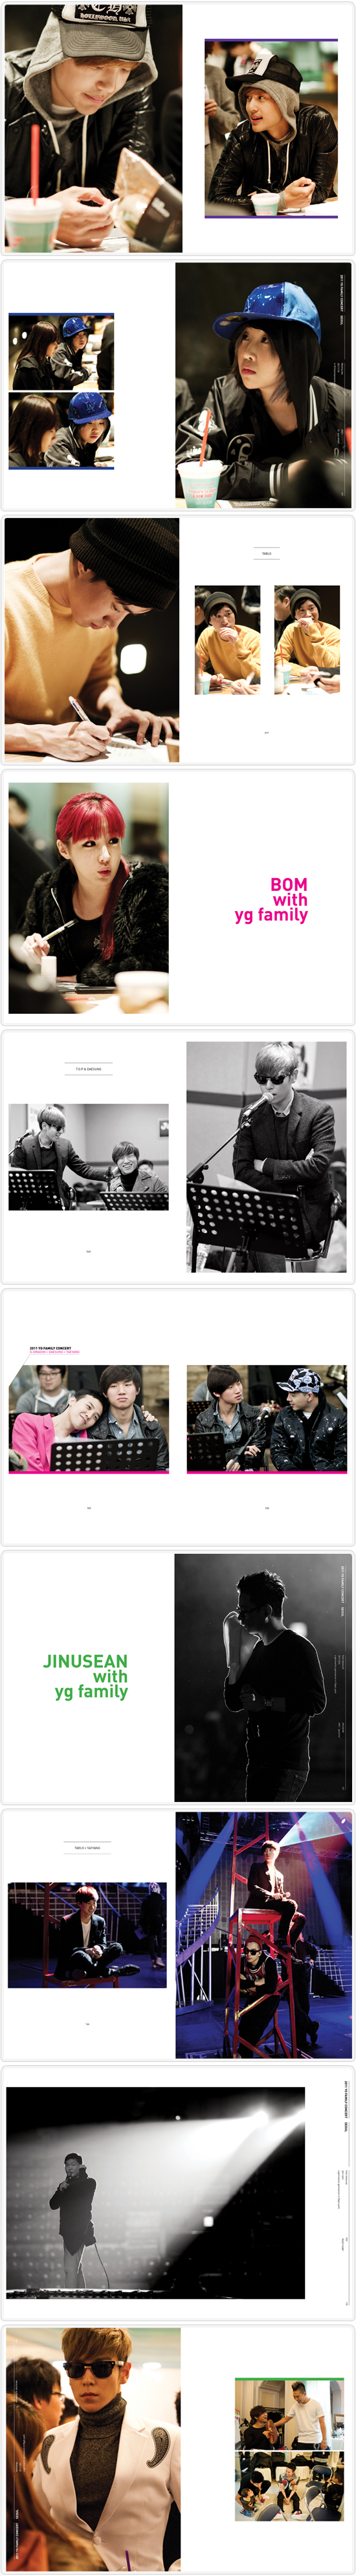 2011_YG_FAMILY_CONCERT_LIVE_CD_2CD__PHOTO_BOOK__91_YG_Family_CardFirst_Limited_93_003.png